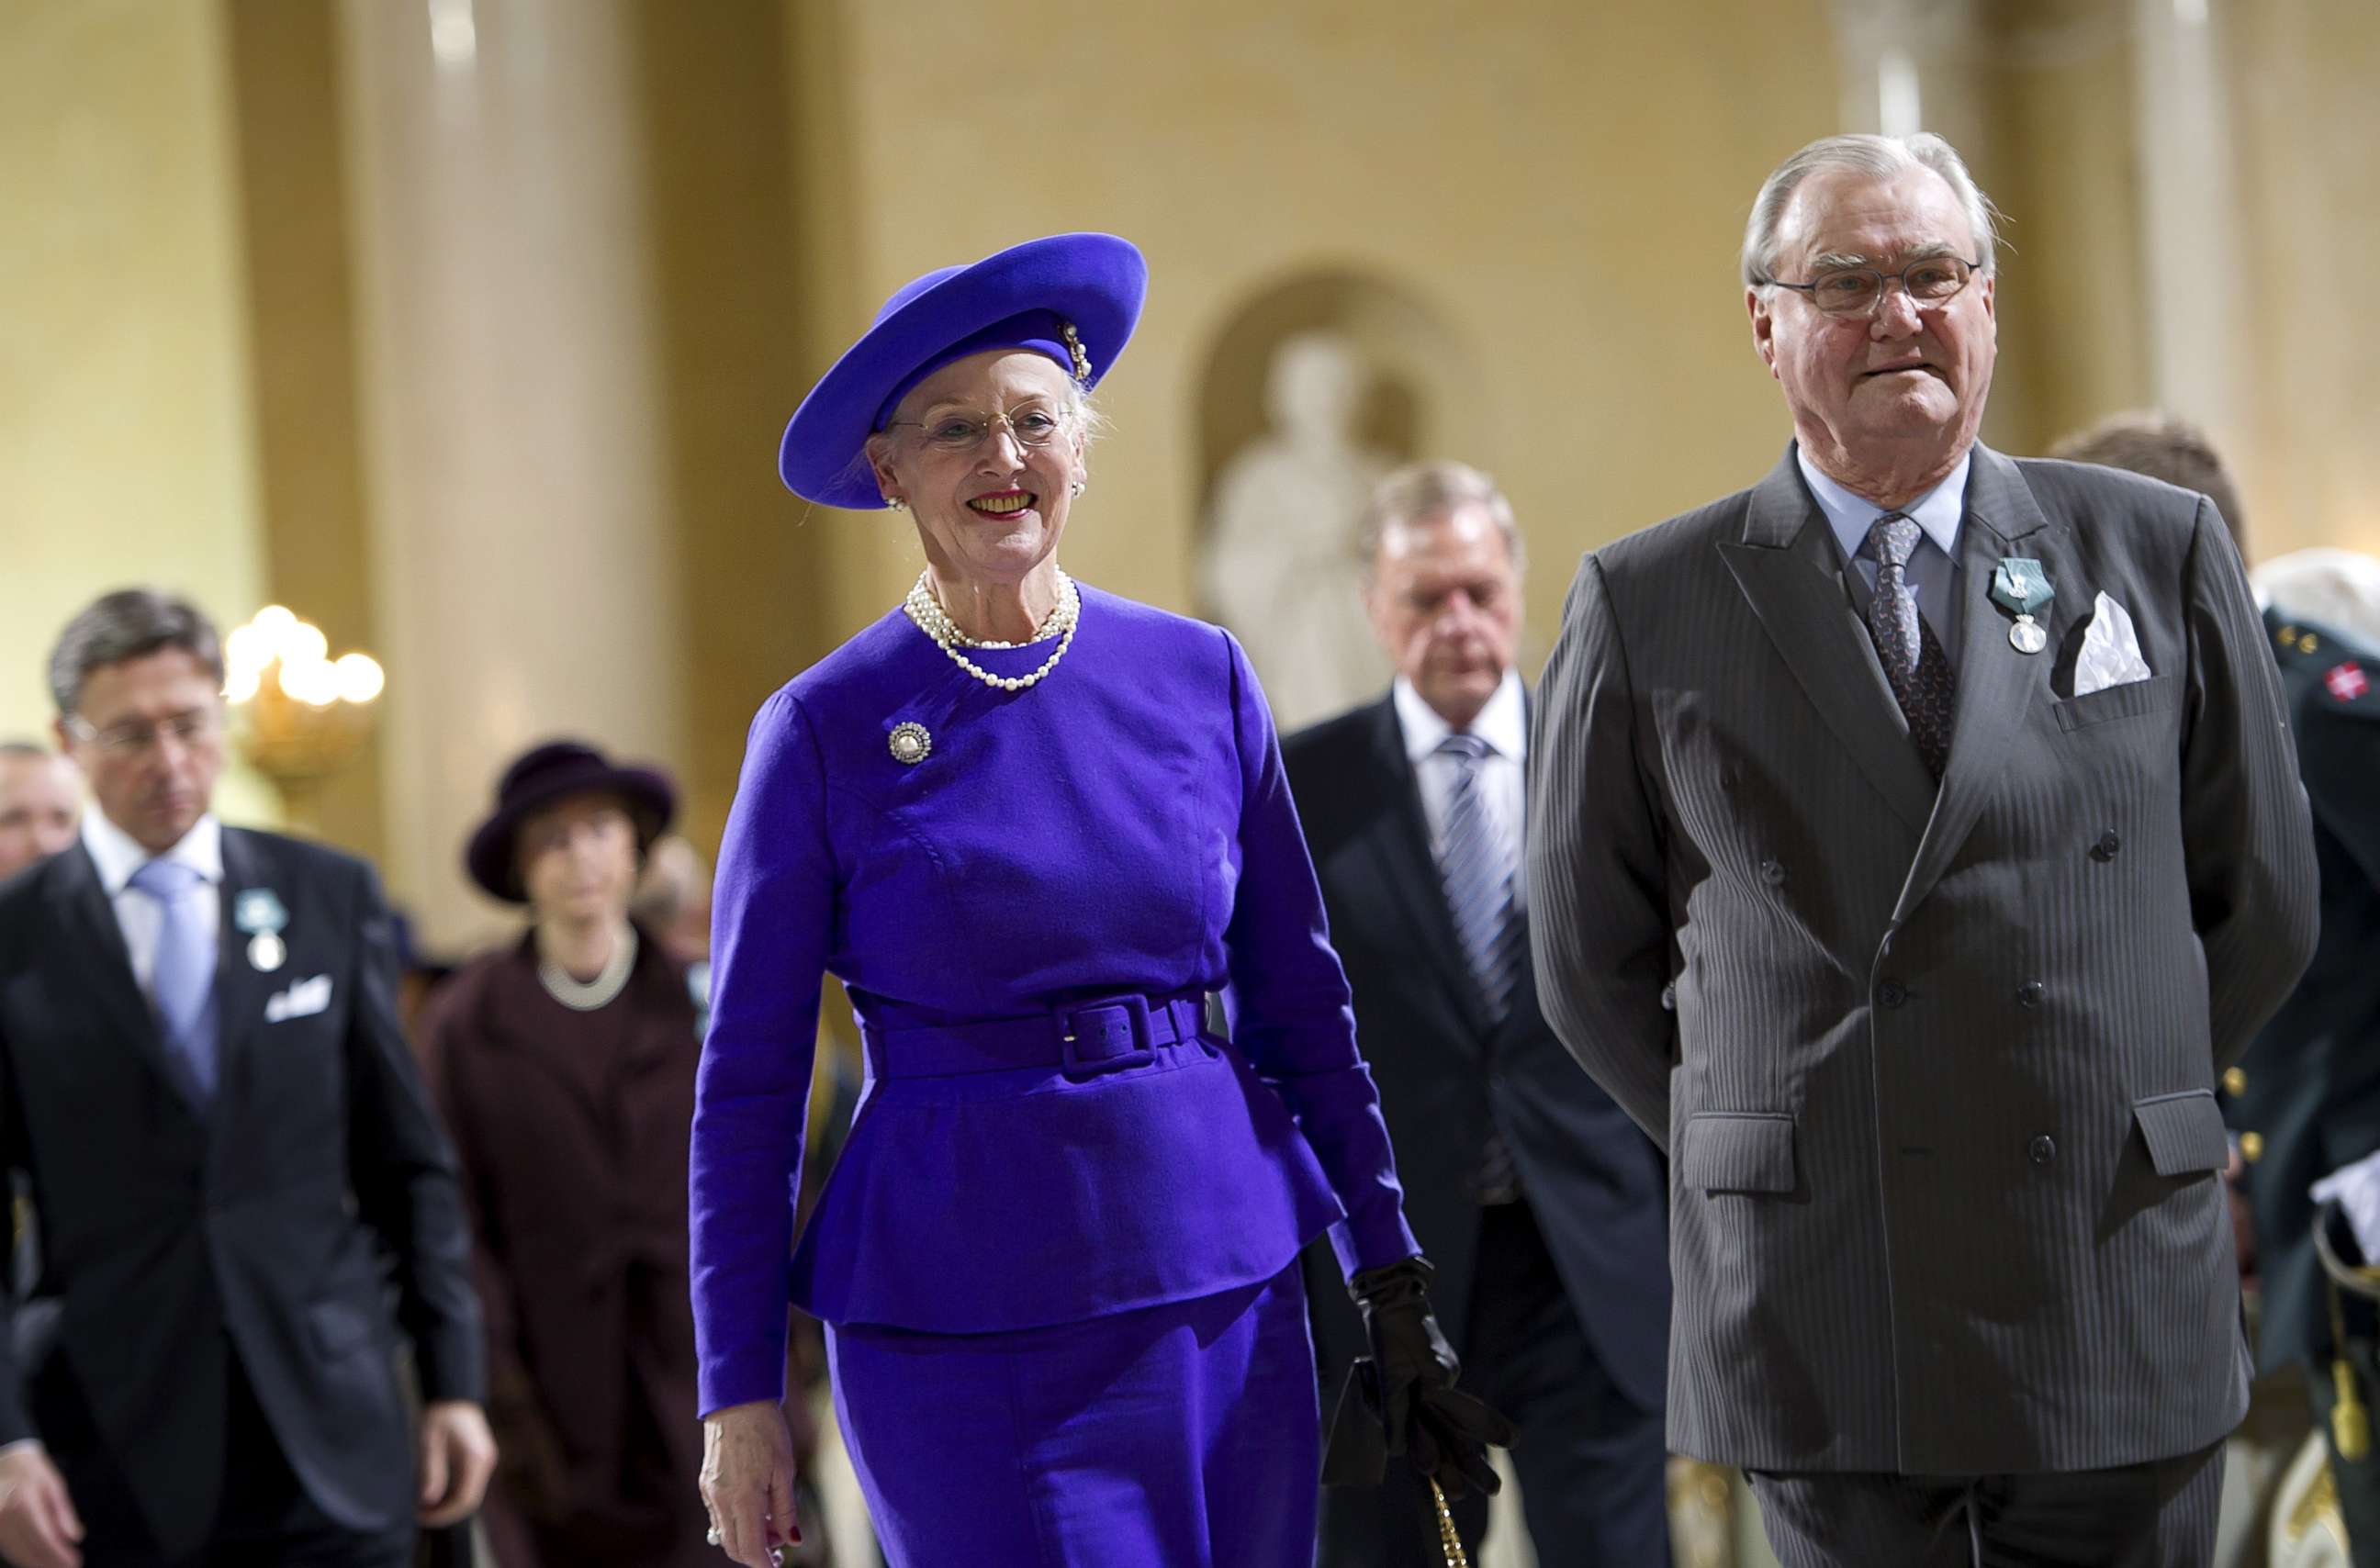 PHOTO: Danish Queen Margrethe and Prince Consort Henrik arrive for the commemoration service in the church in Christiansborg Castle, Copenhagen on the occasion of Danish Queen Margrethe's 40th jubilee in this Jan. 15, 2012 file photo.